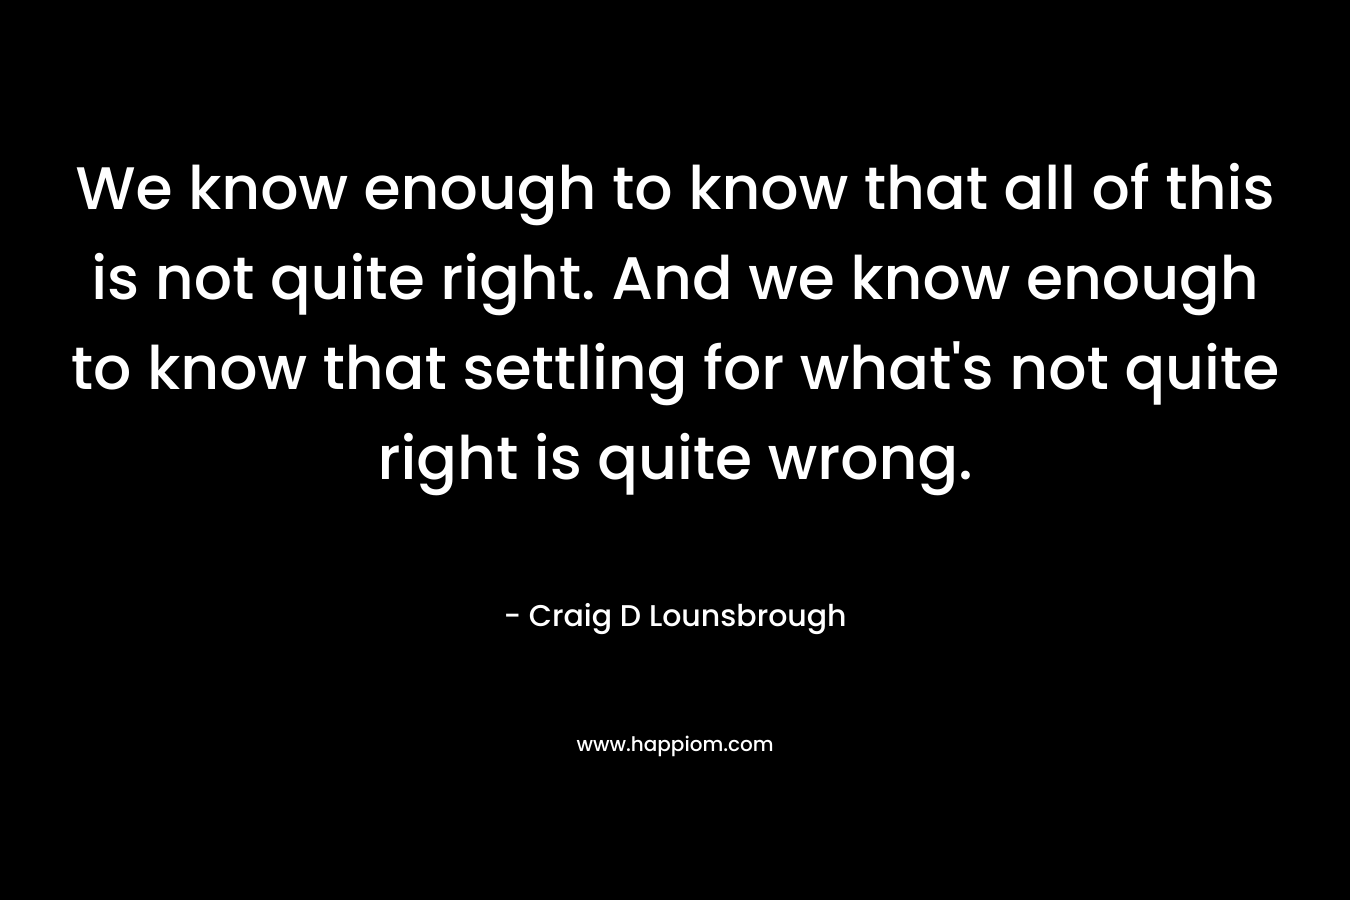 We know enough to know that all of this is not quite right. And we know enough to know that settling for what’s not quite right is quite wrong. – Craig D Lounsbrough